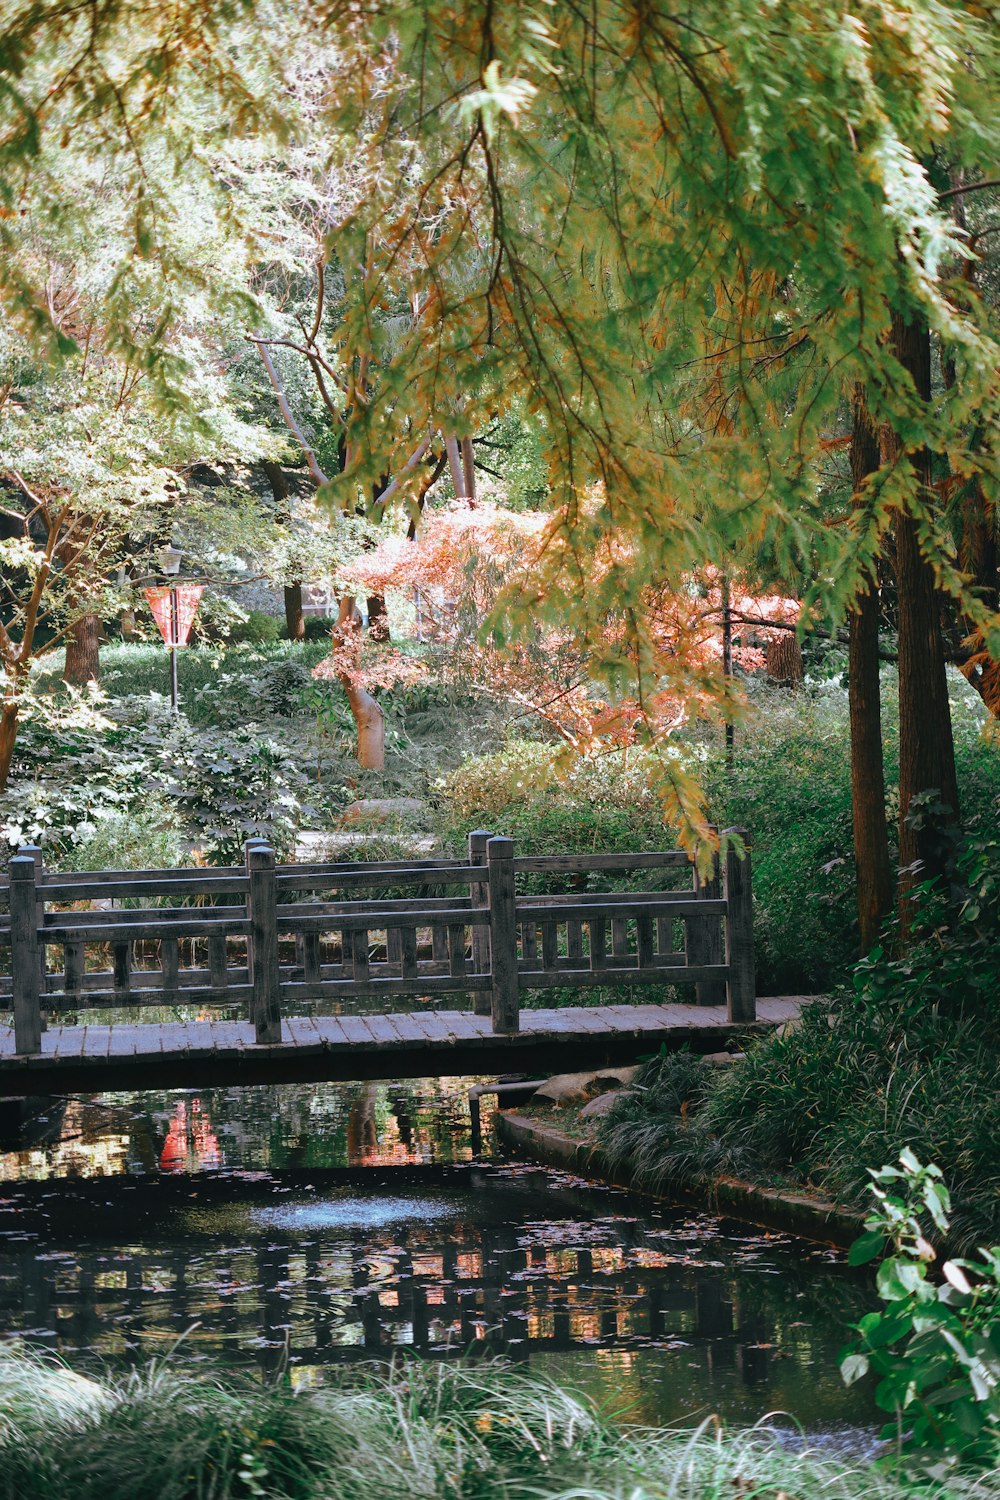 a bridge over a small pond in a park